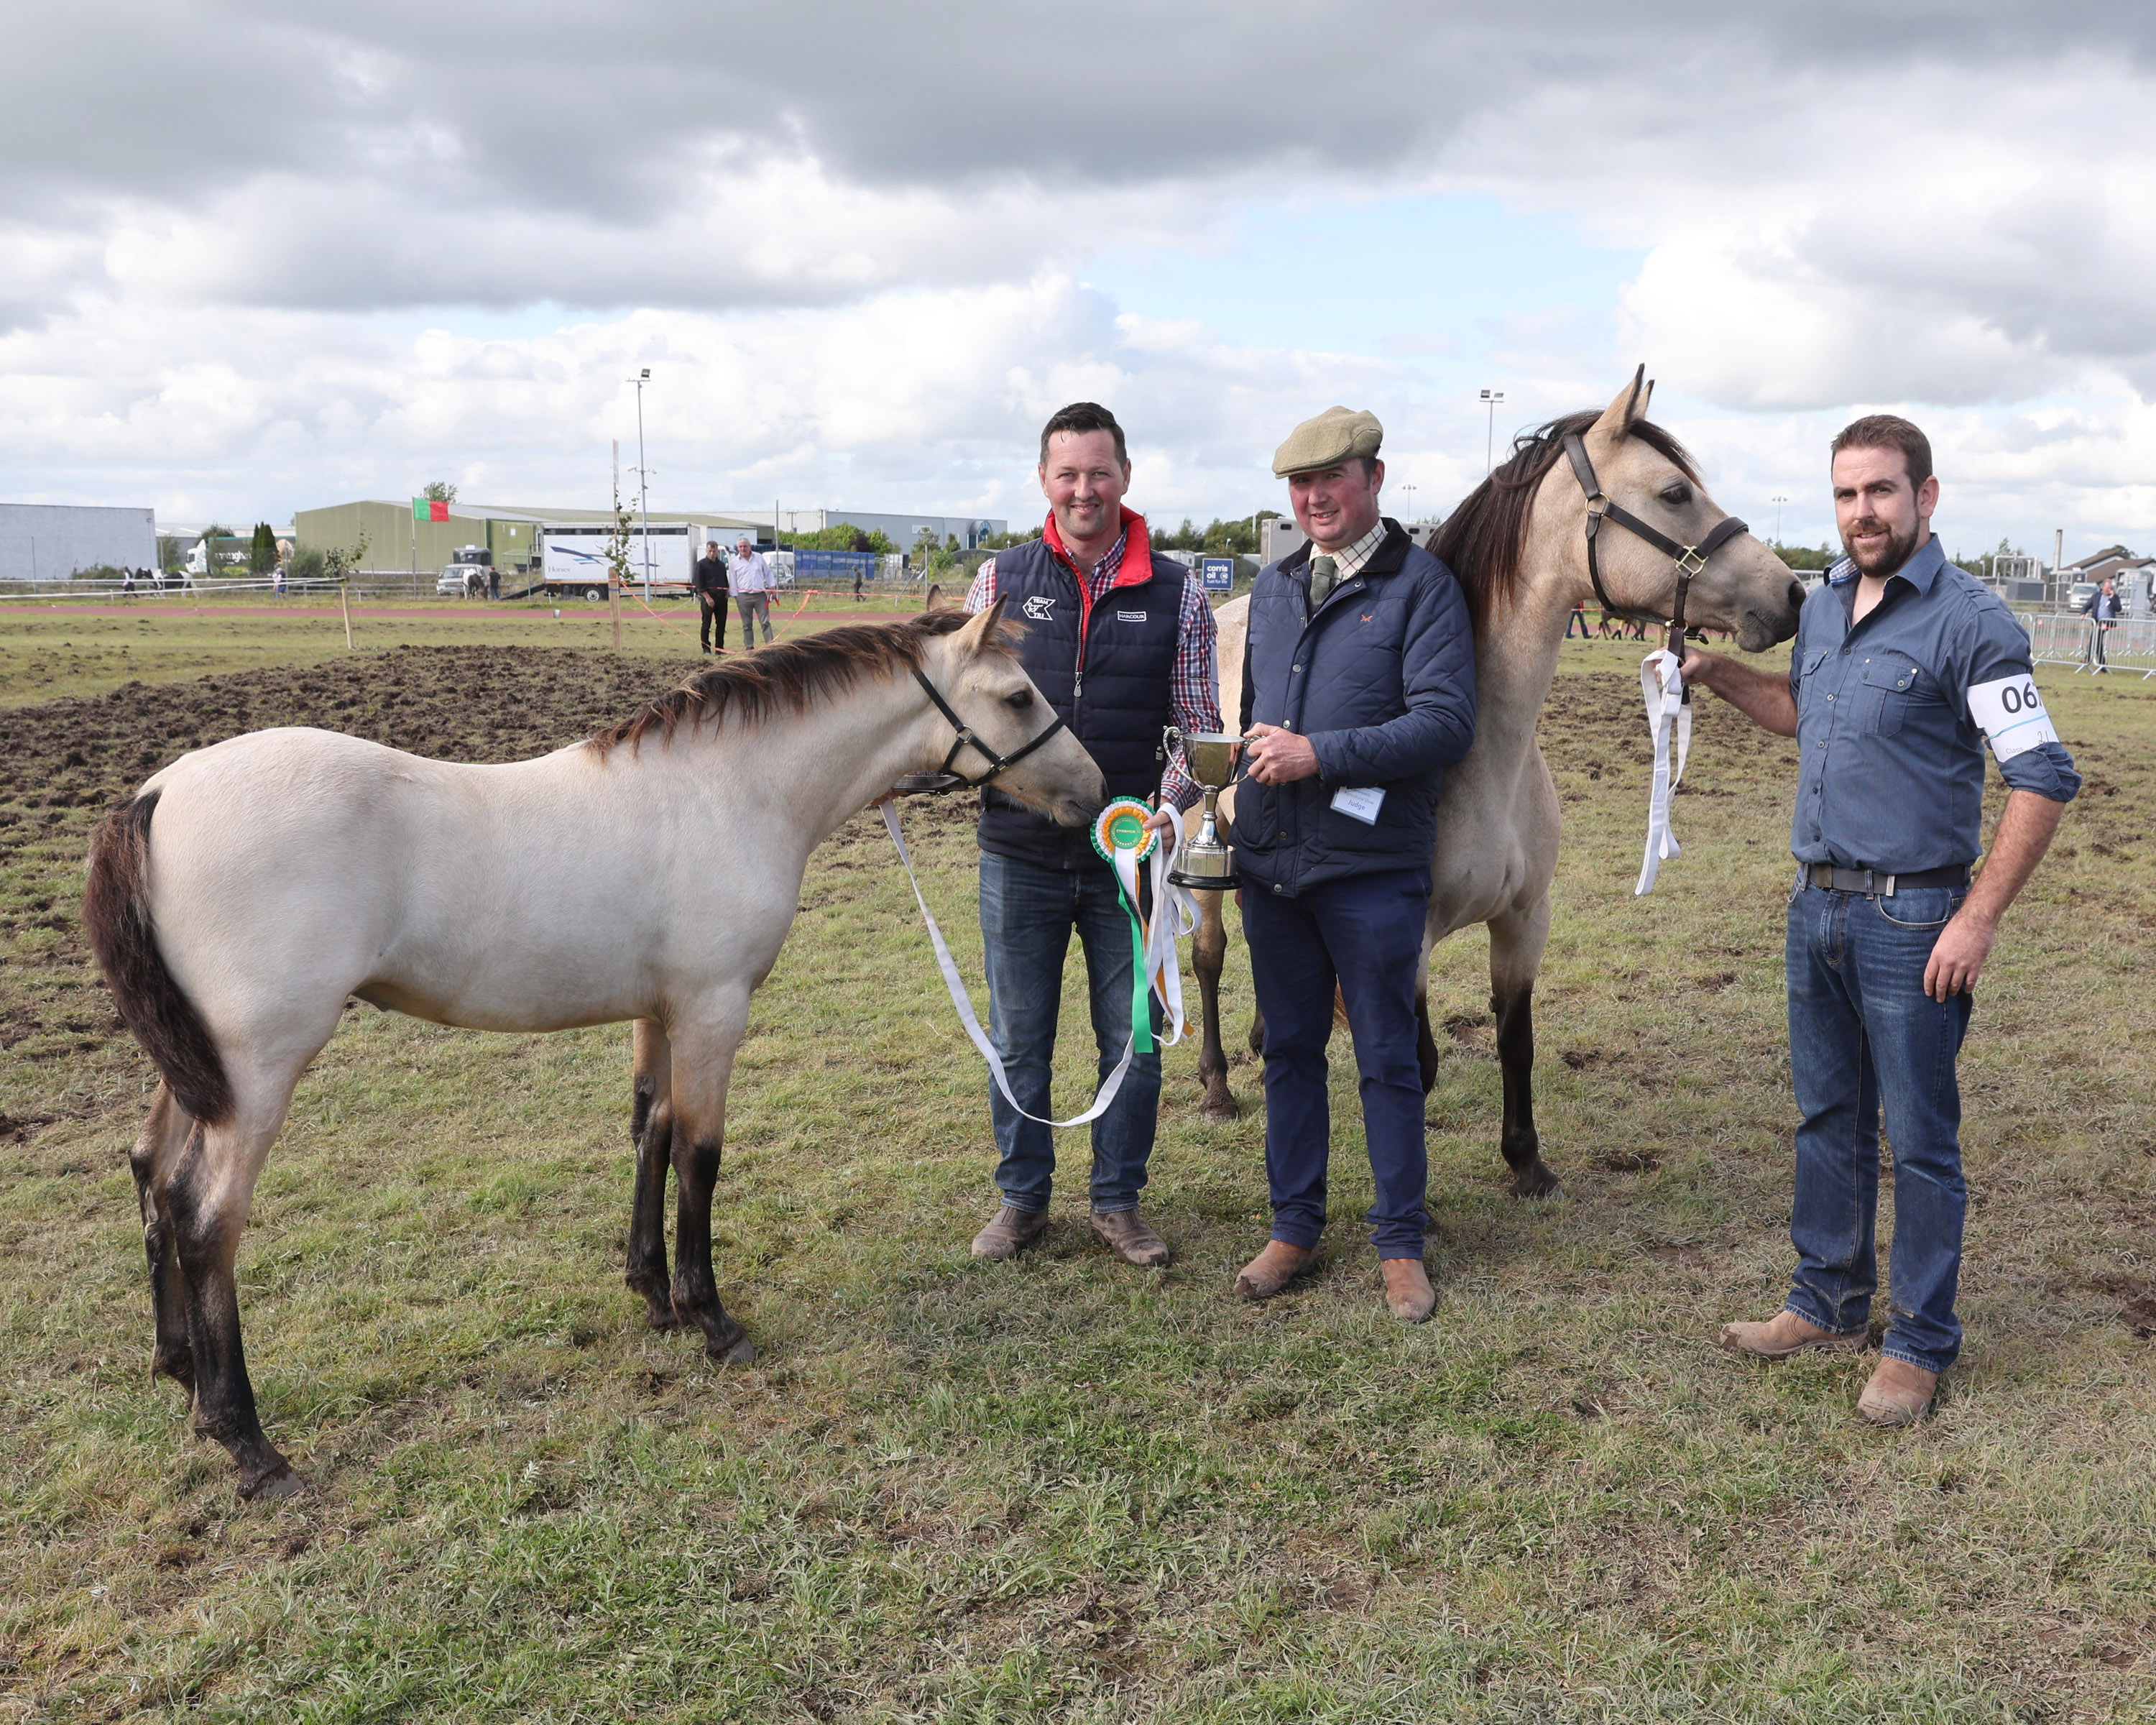 Padraig Hallinan Killawalla Westport Co Mayo is presented with the Cup for  Champion Connemara Pony by Glenn Farrell Walker (Judge) at the Claremorris 103rd Show in Claremorris on 5th August Included is Matthew Newell. Photo © Michael Donnelly